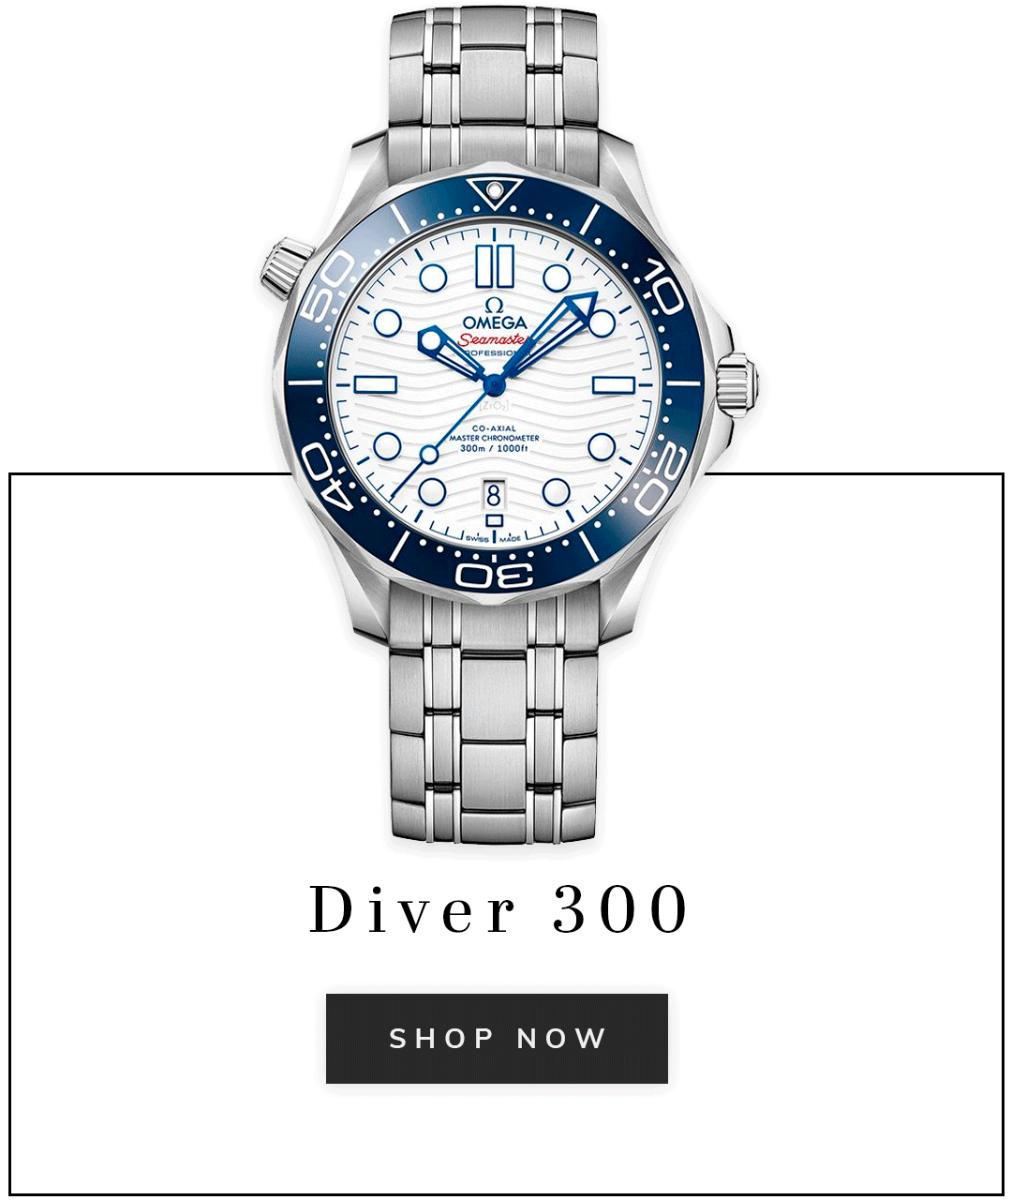 An OMEGA seamaster diver 300 watch with text shop now